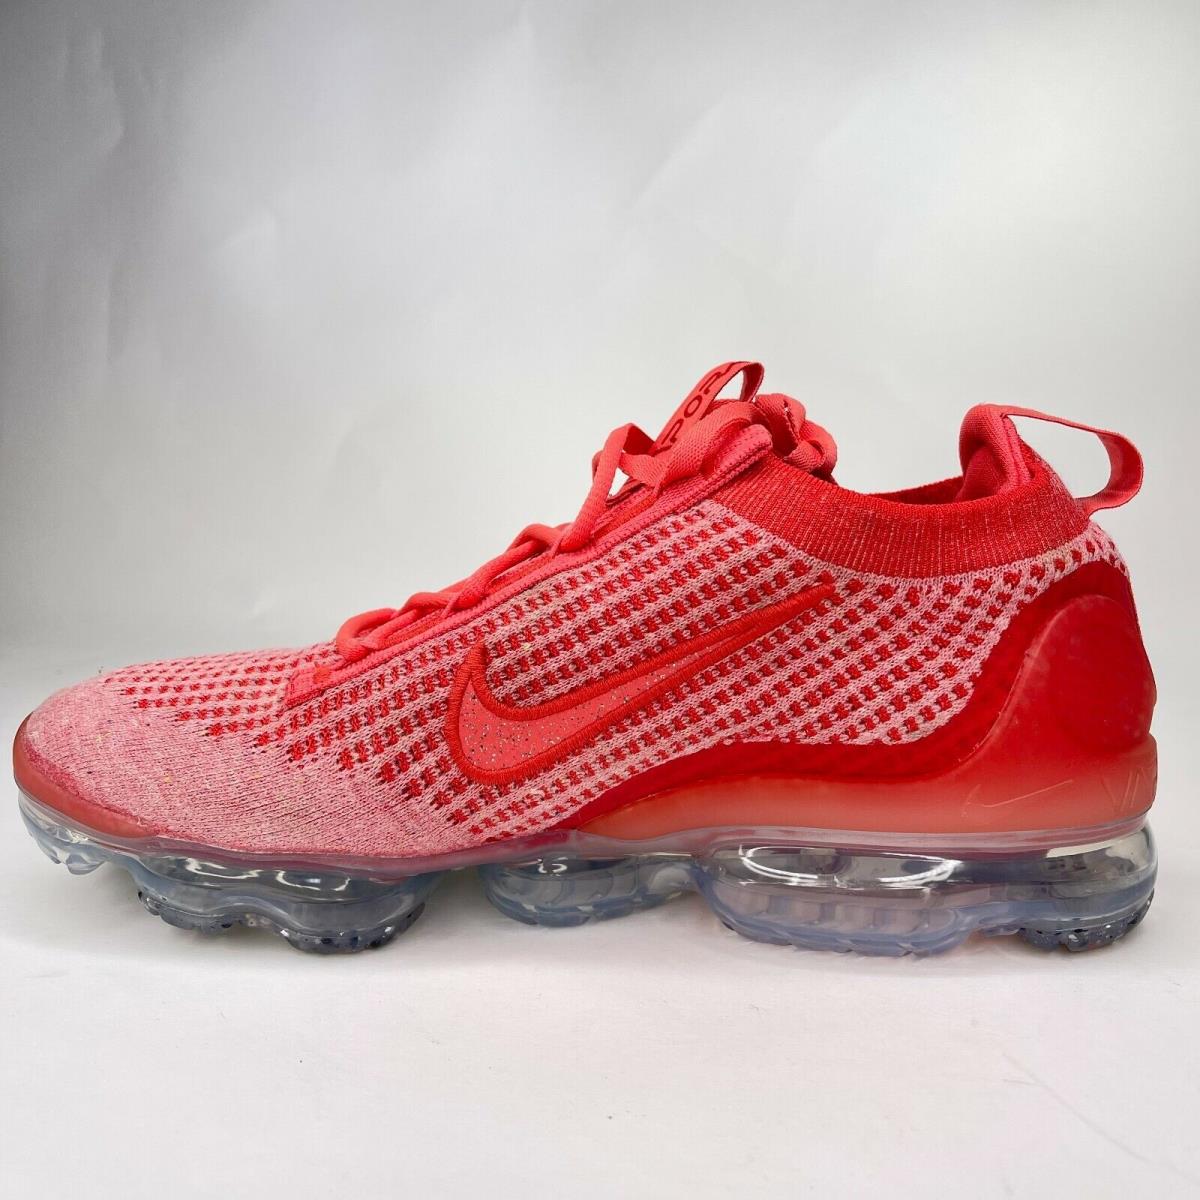 Off White Scarpe red nike vapormax Vapormax Clearance Discount, 54% OFF